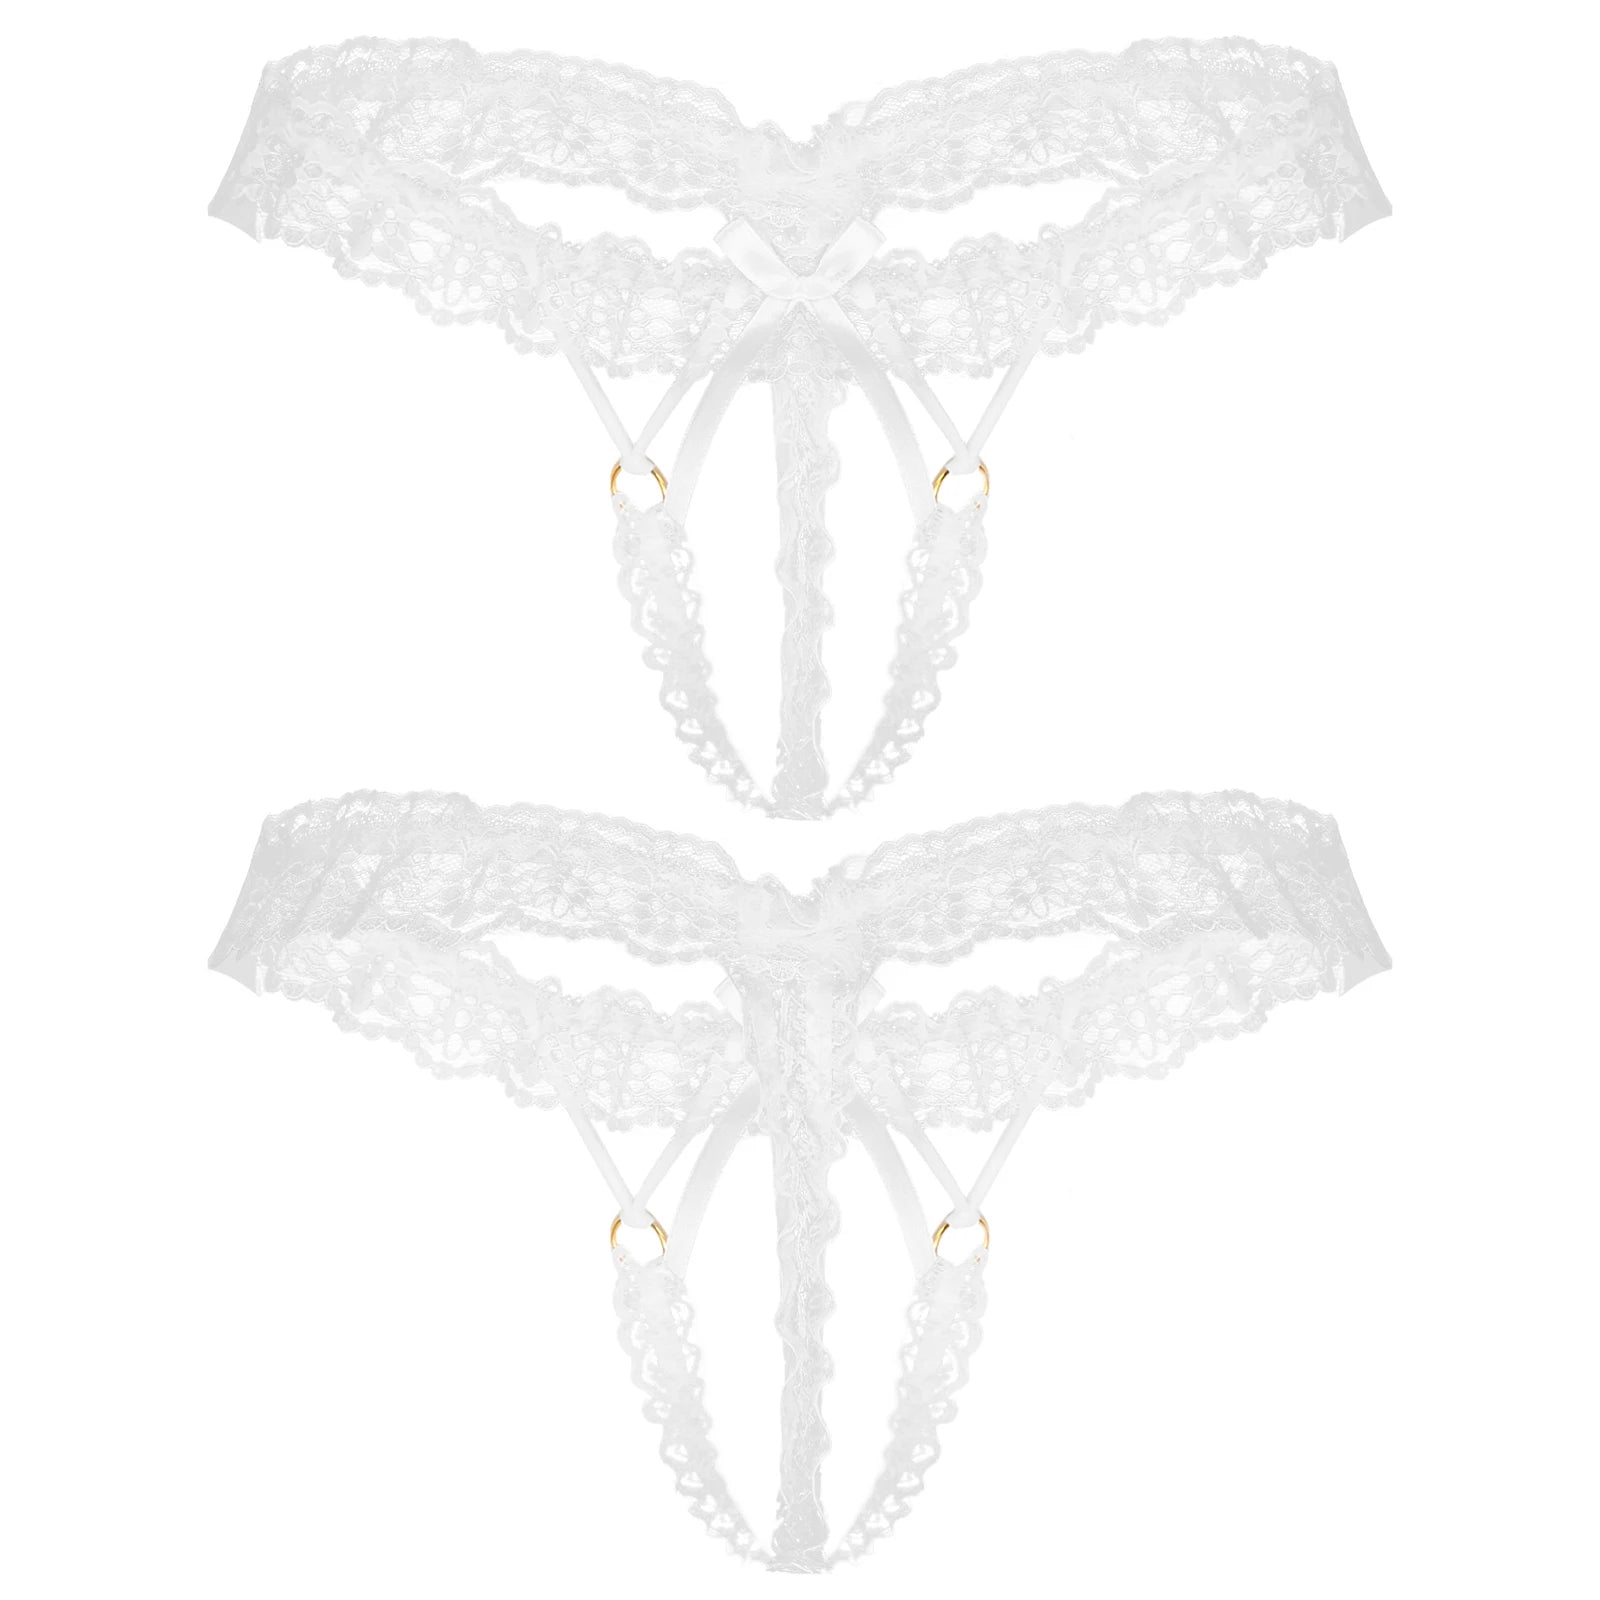 Men's Sexy See-through Lace Crotchless Briefs G-string T-back Thongs ...